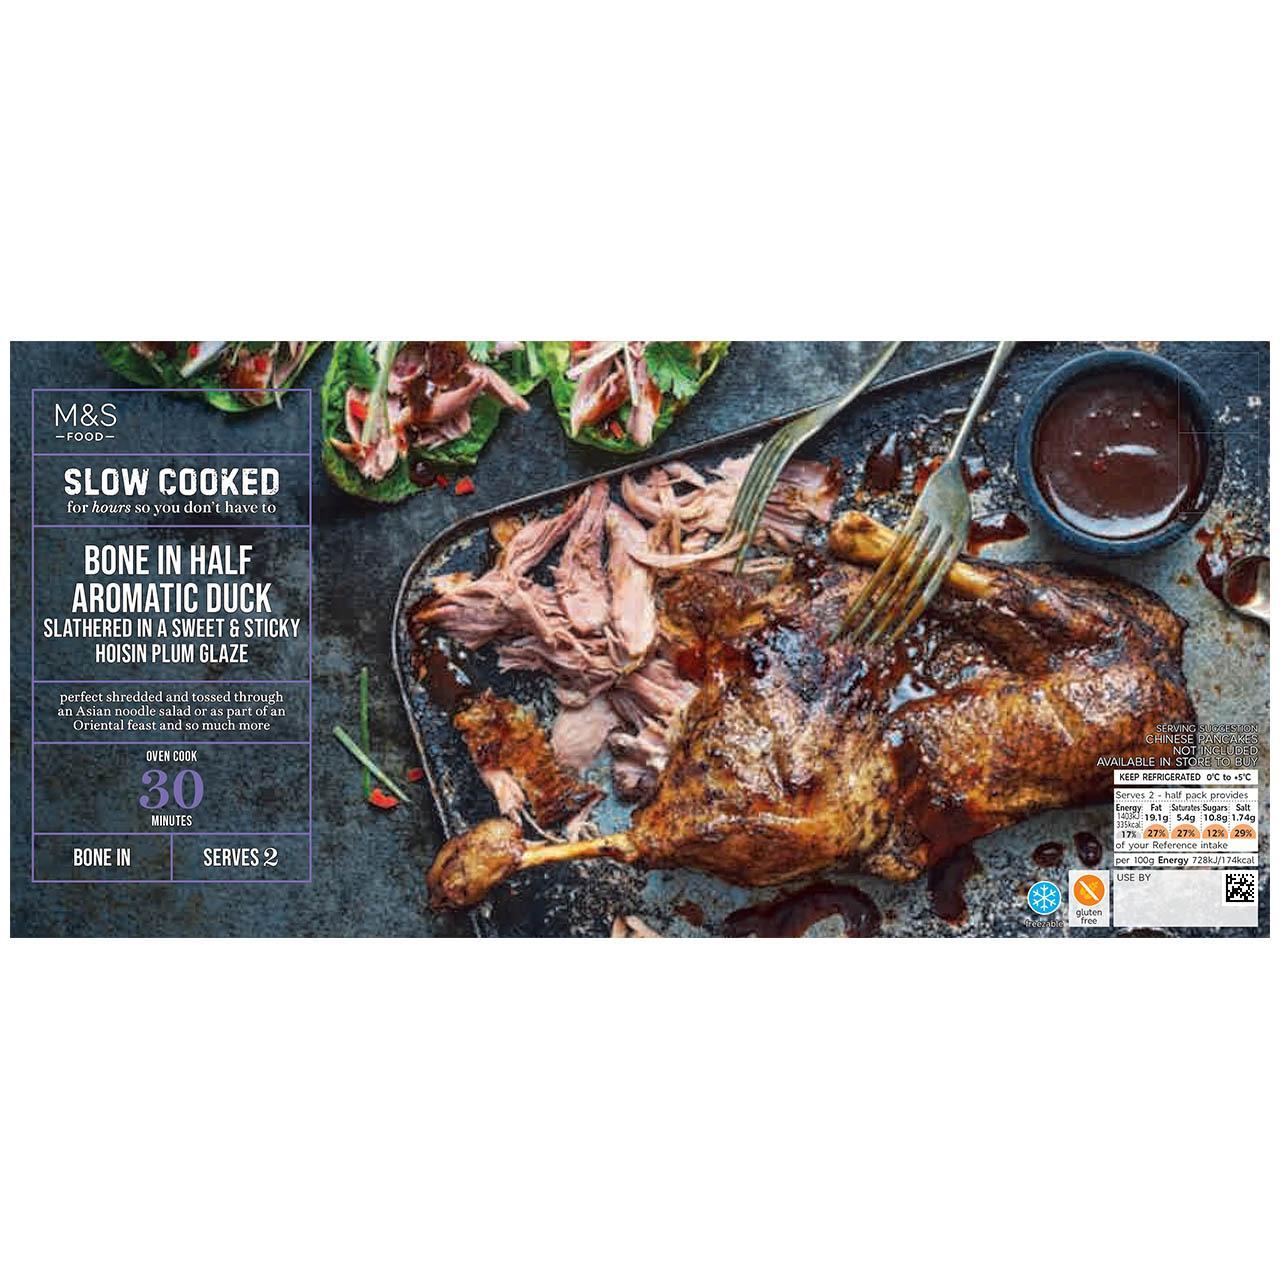 M&S Slow Cooked Aromatic Bone In Half Duck